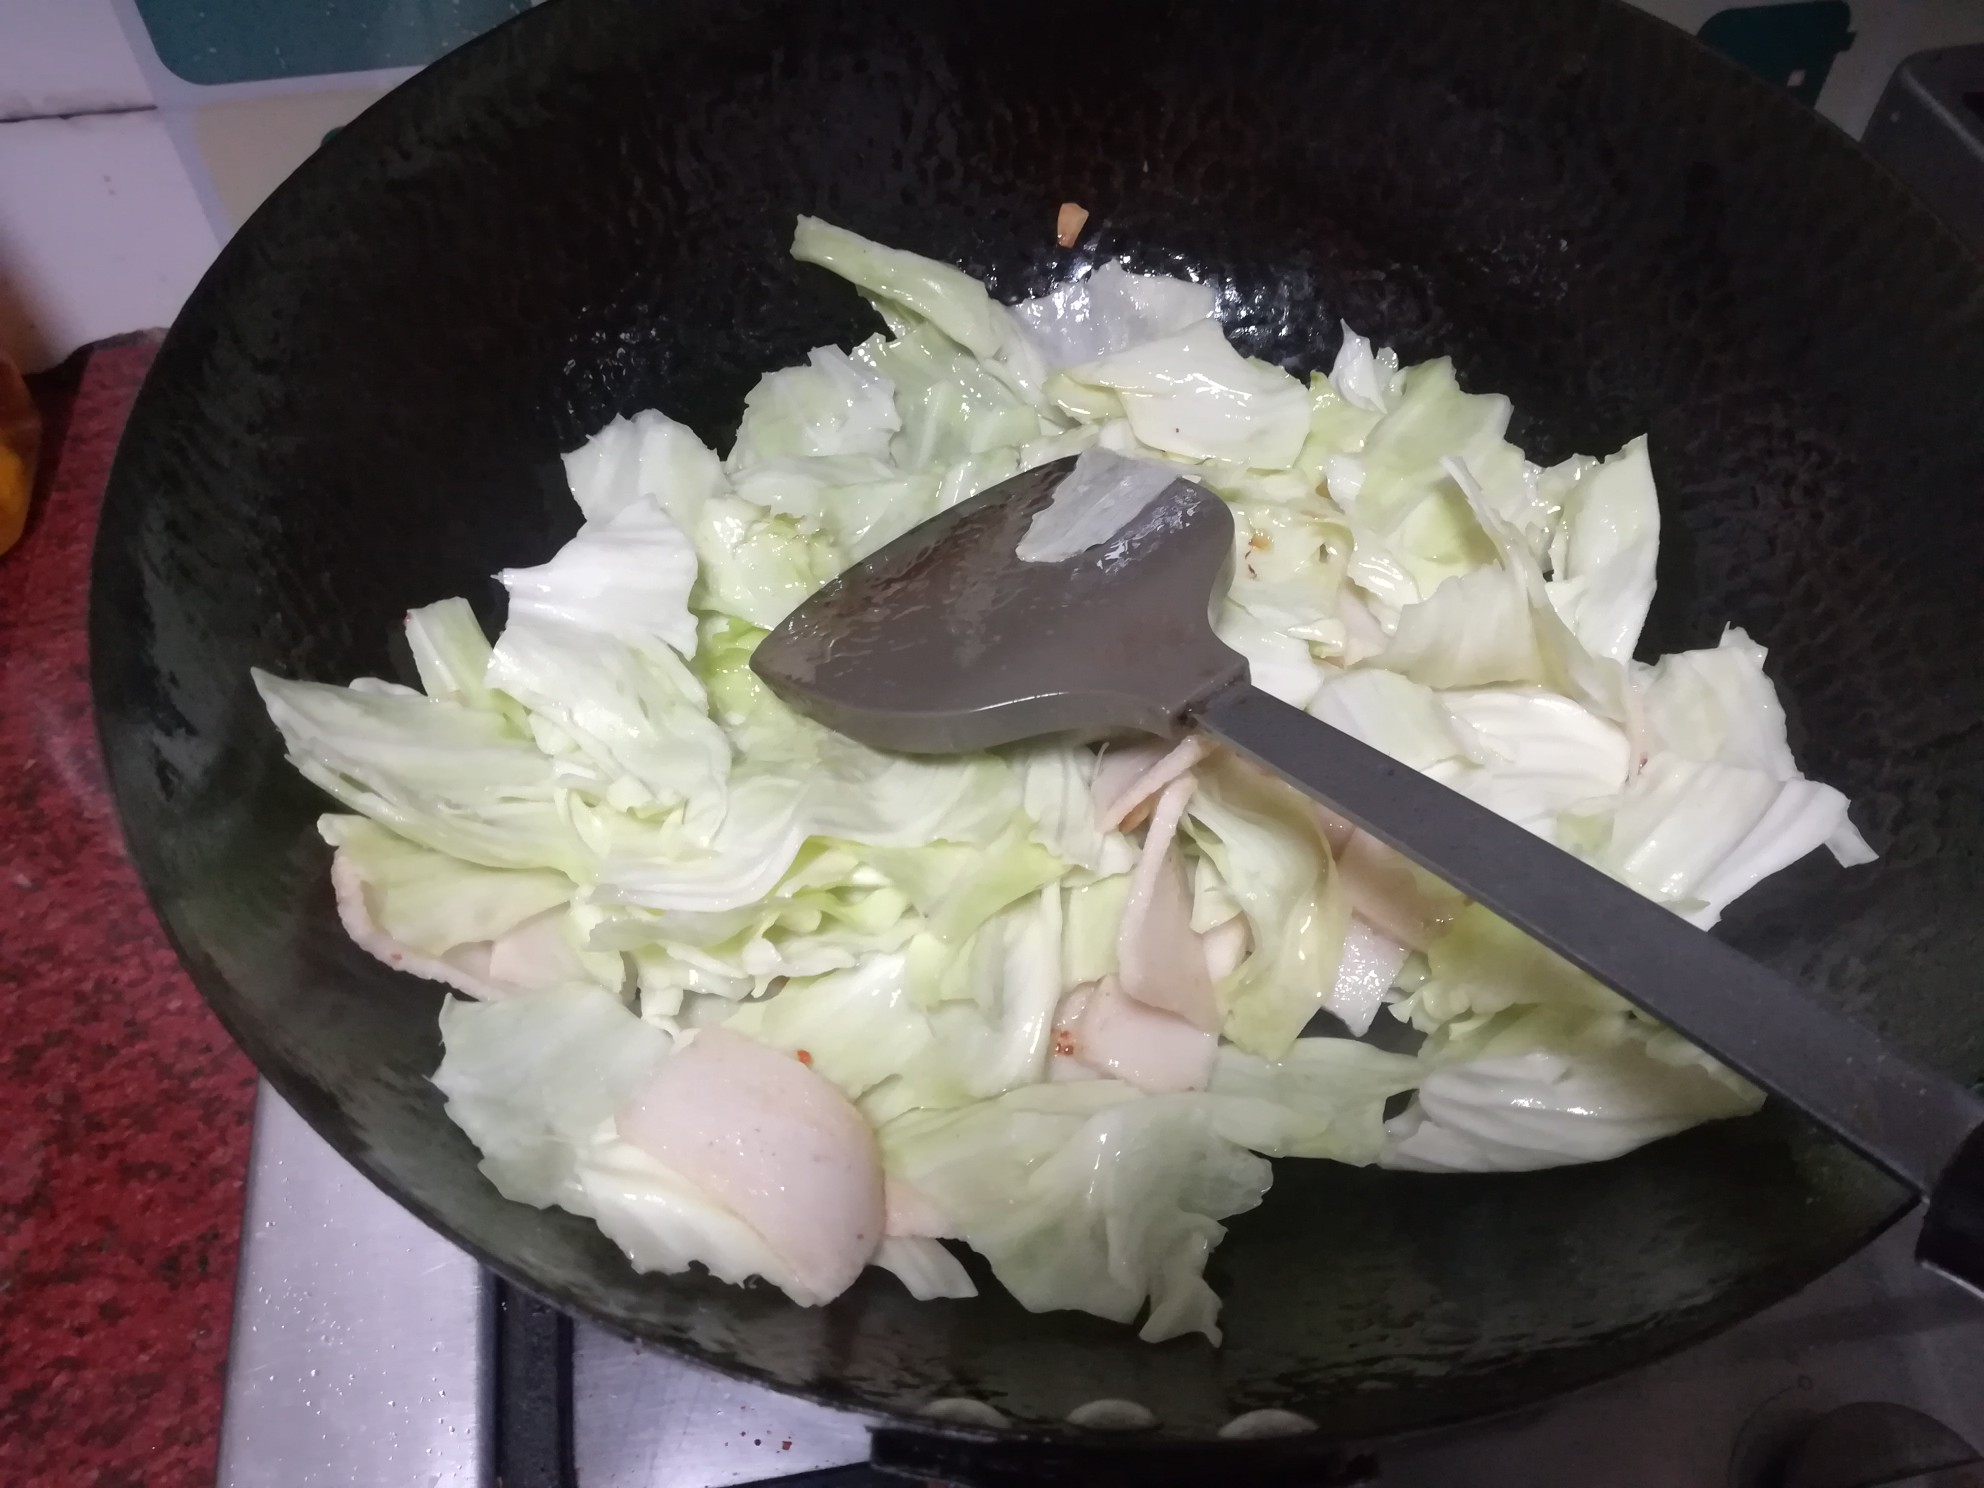 Fried Cabbage with Fish Tofu recipe